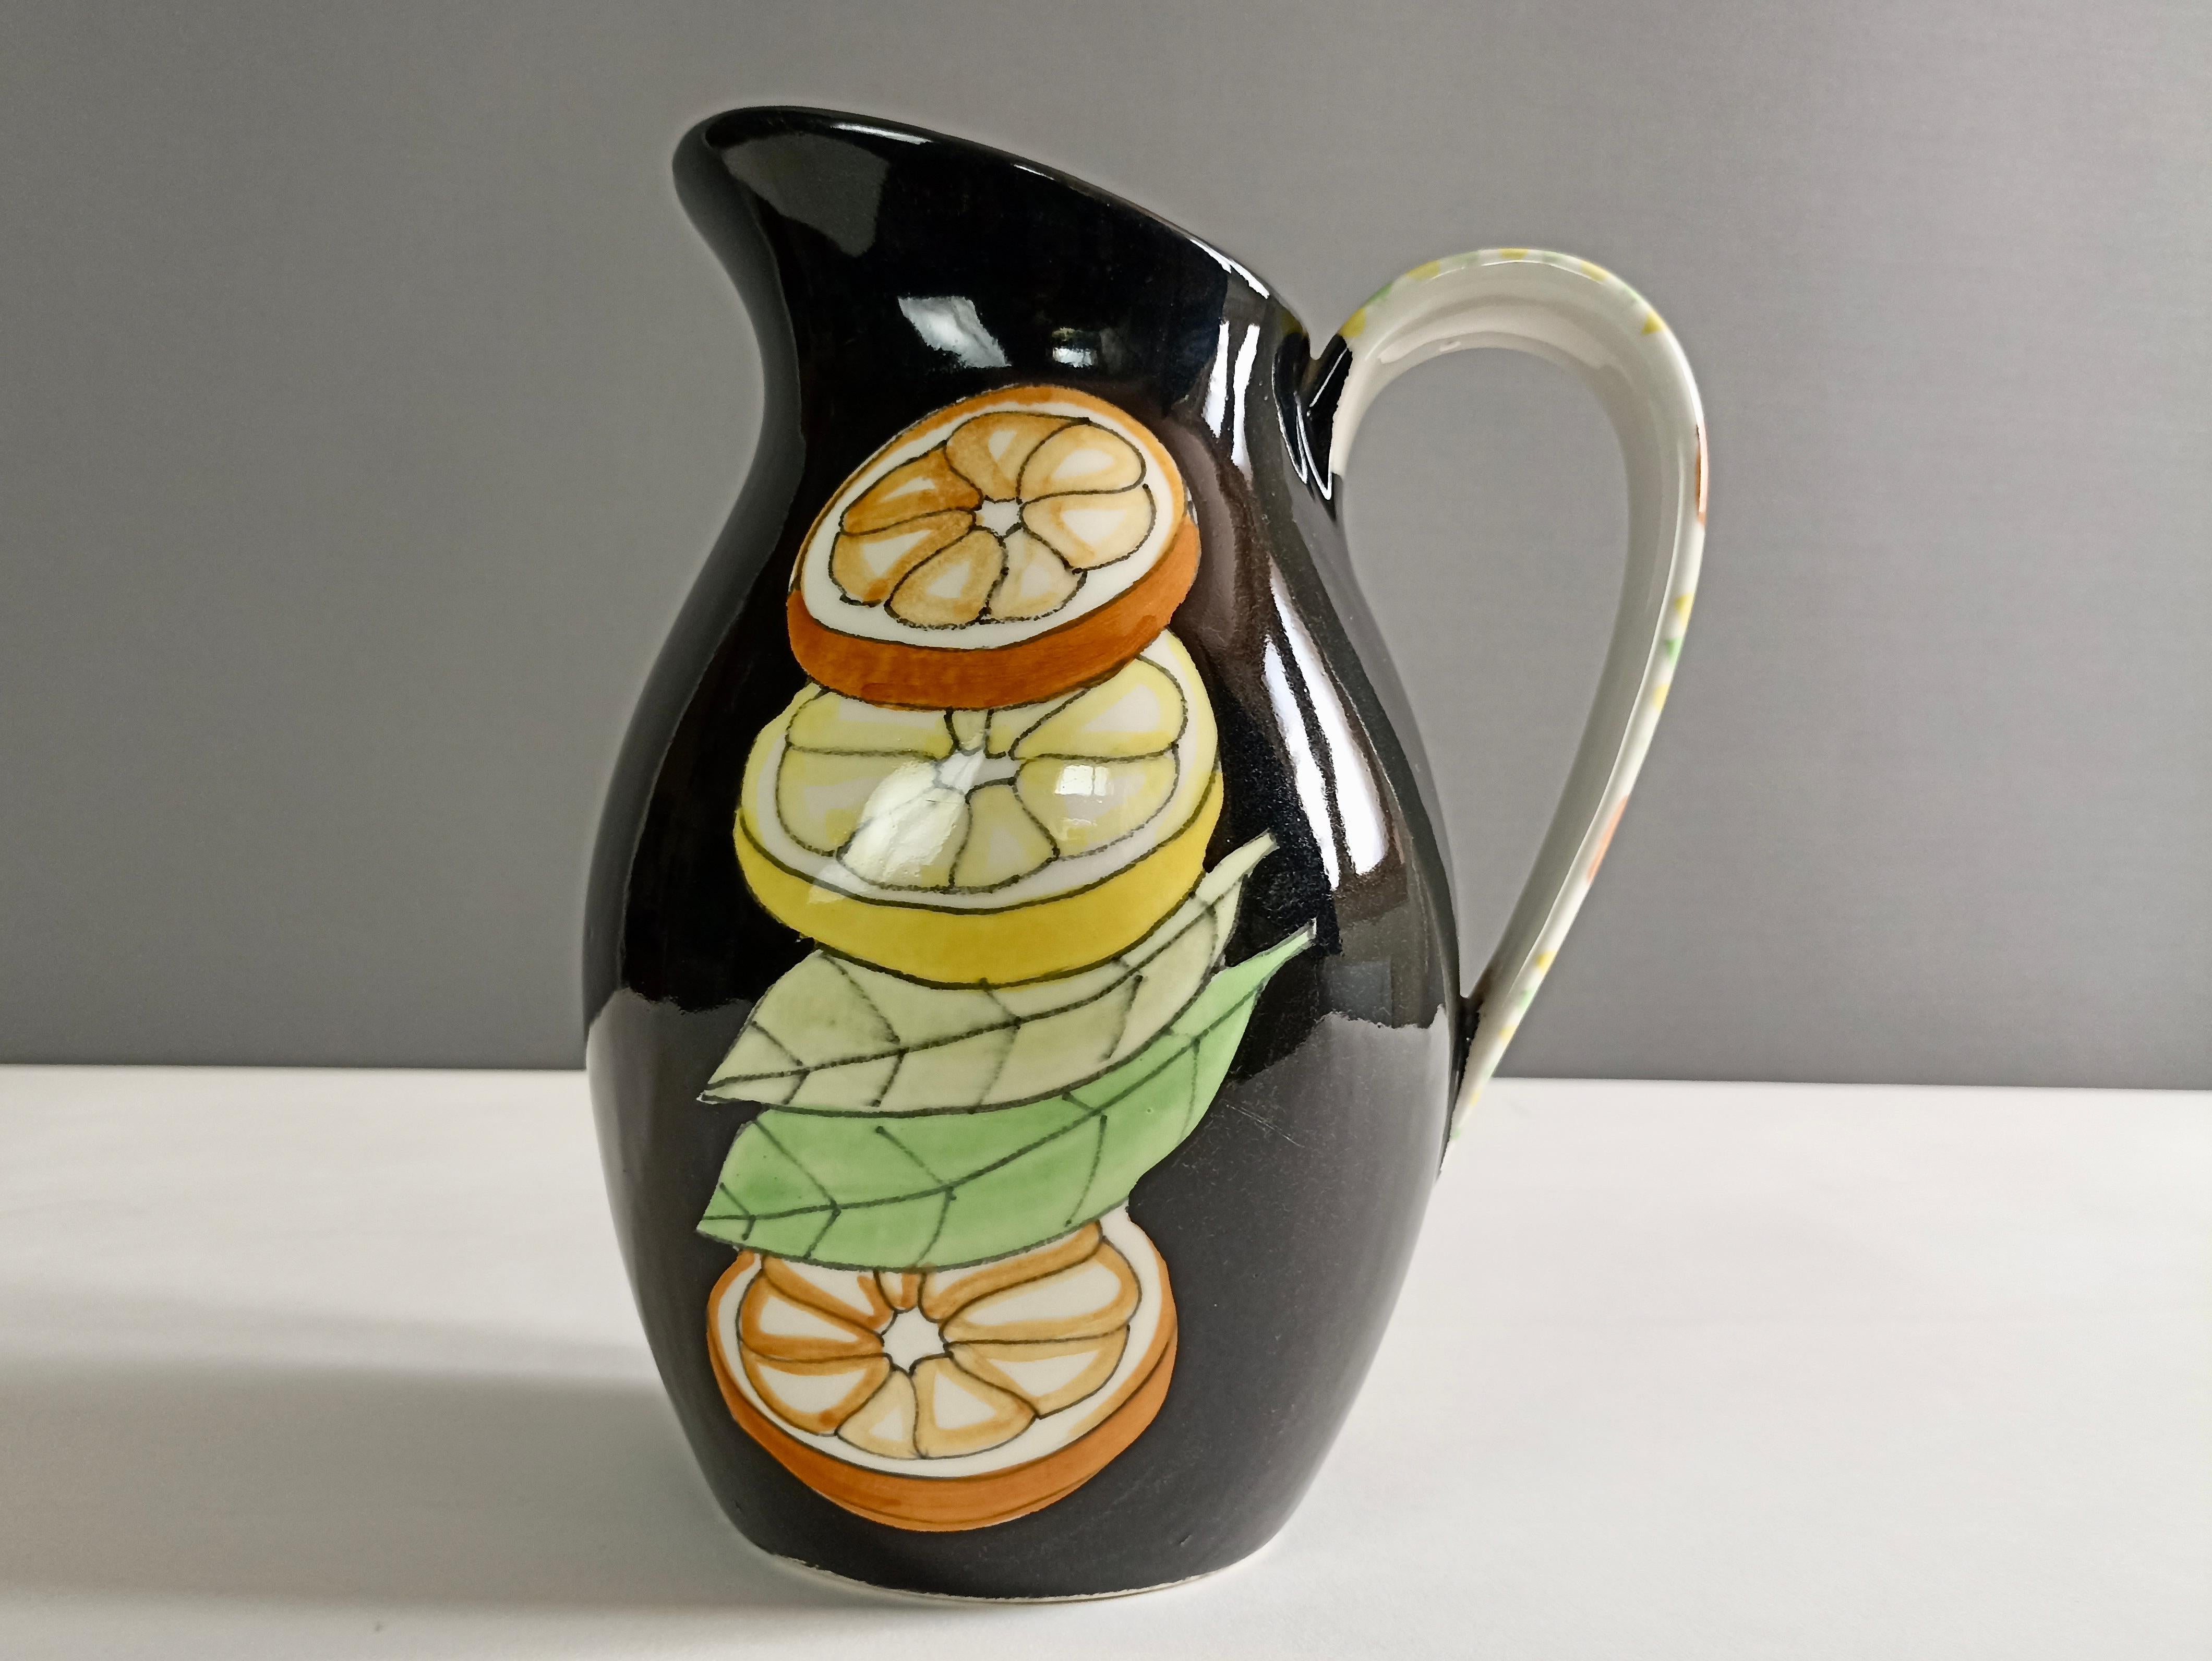 Elegant majolica jug from the 1950s, hand-painted with a citrus subject on both sides, attributable to the production of Ernestine Ceramics Salerno, Italy.
This famous brand takes its name from the American decorator Ernestine Virden Cannon